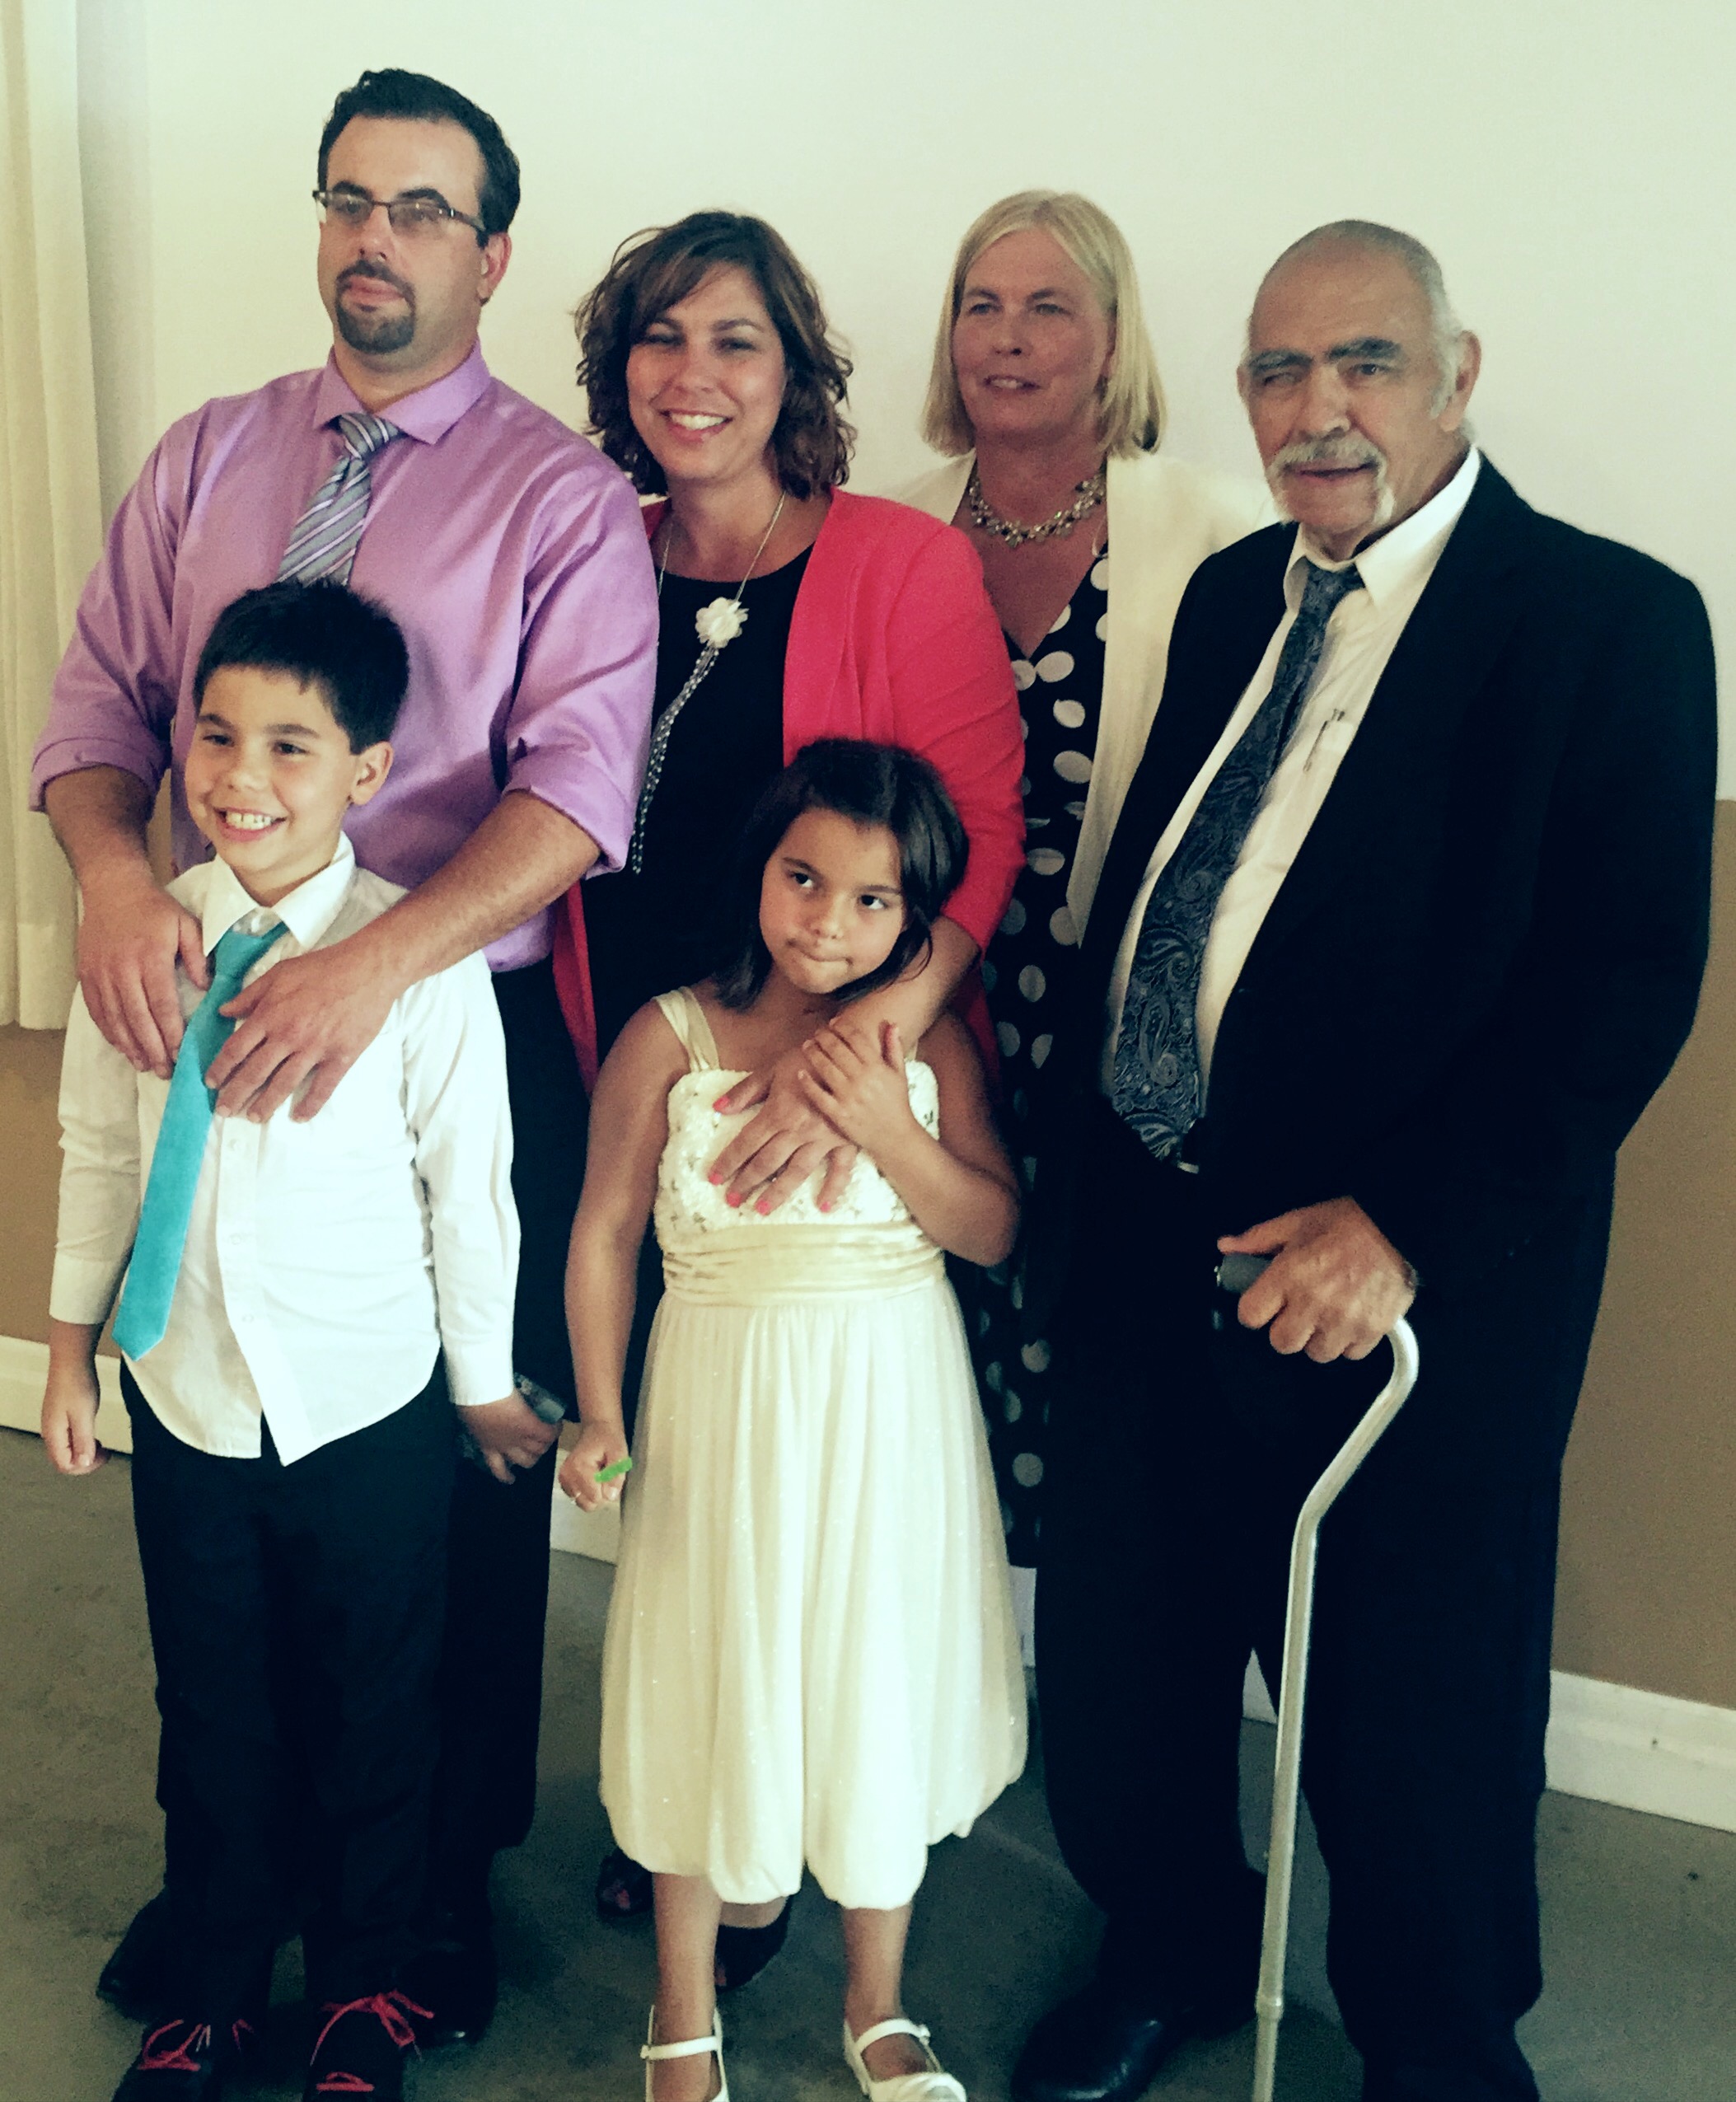 Wedding August 8 2015 family picture